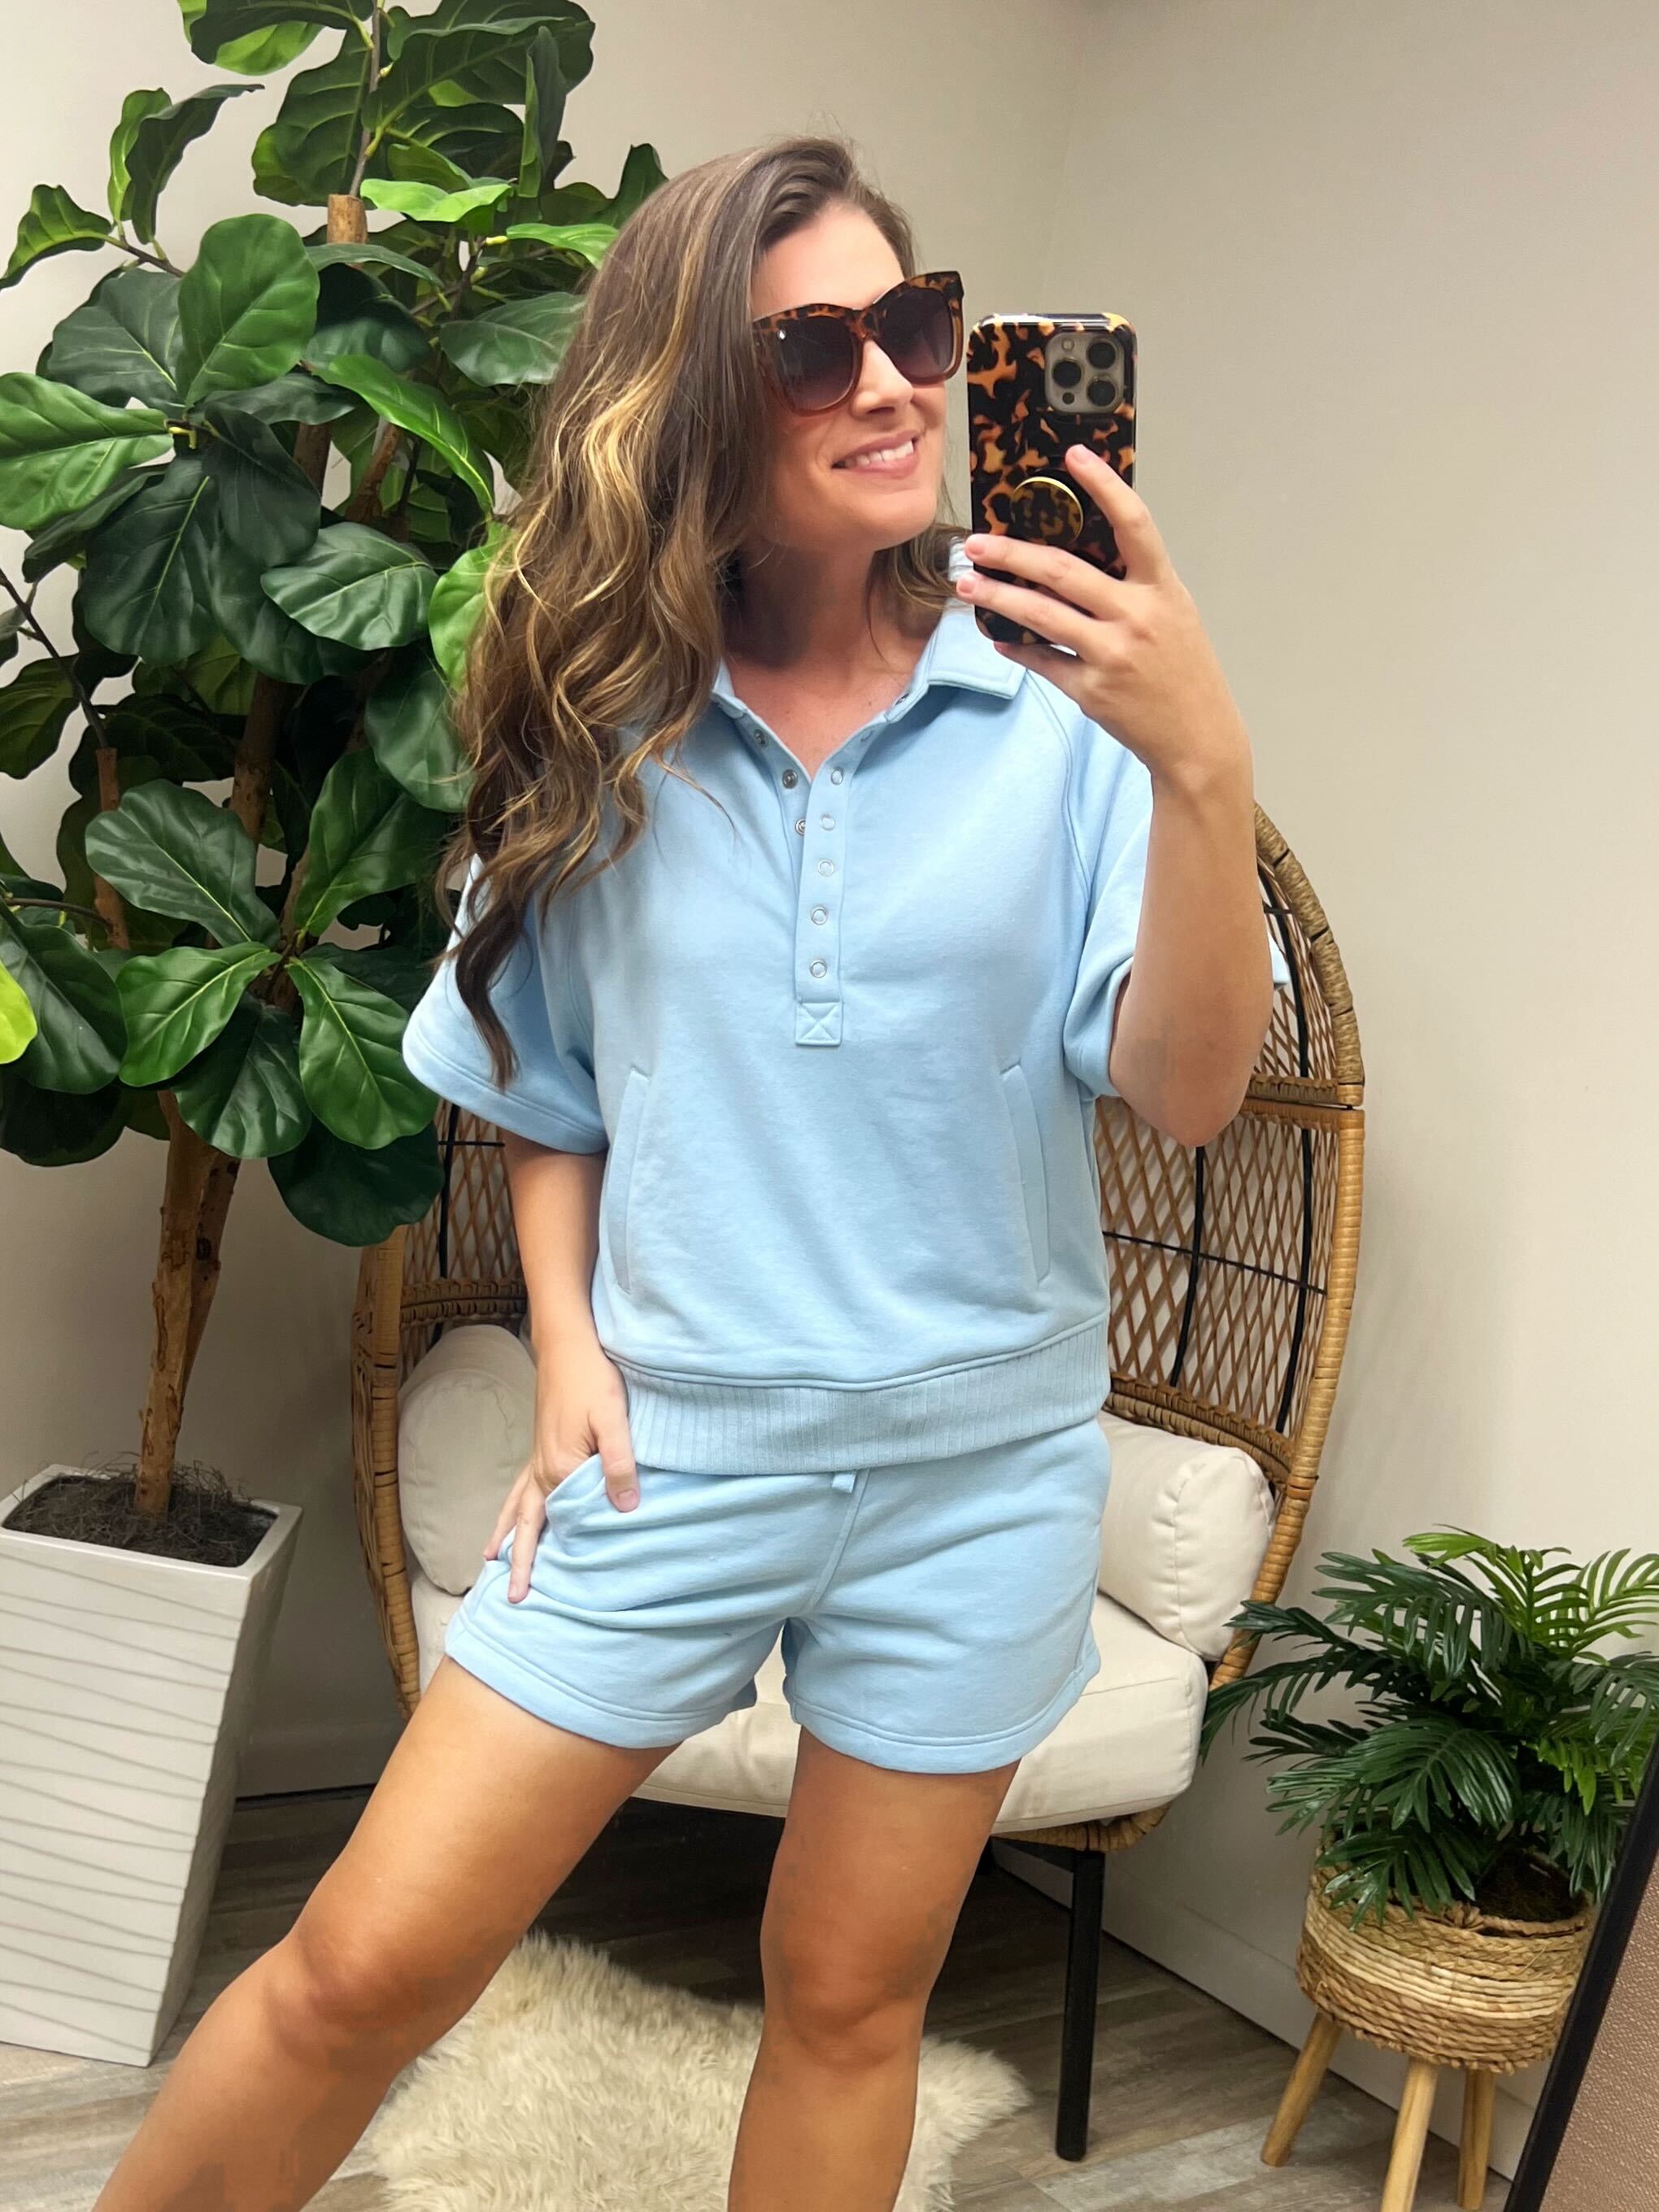 Meet Me by the Pier Collared Top in Sky Blue